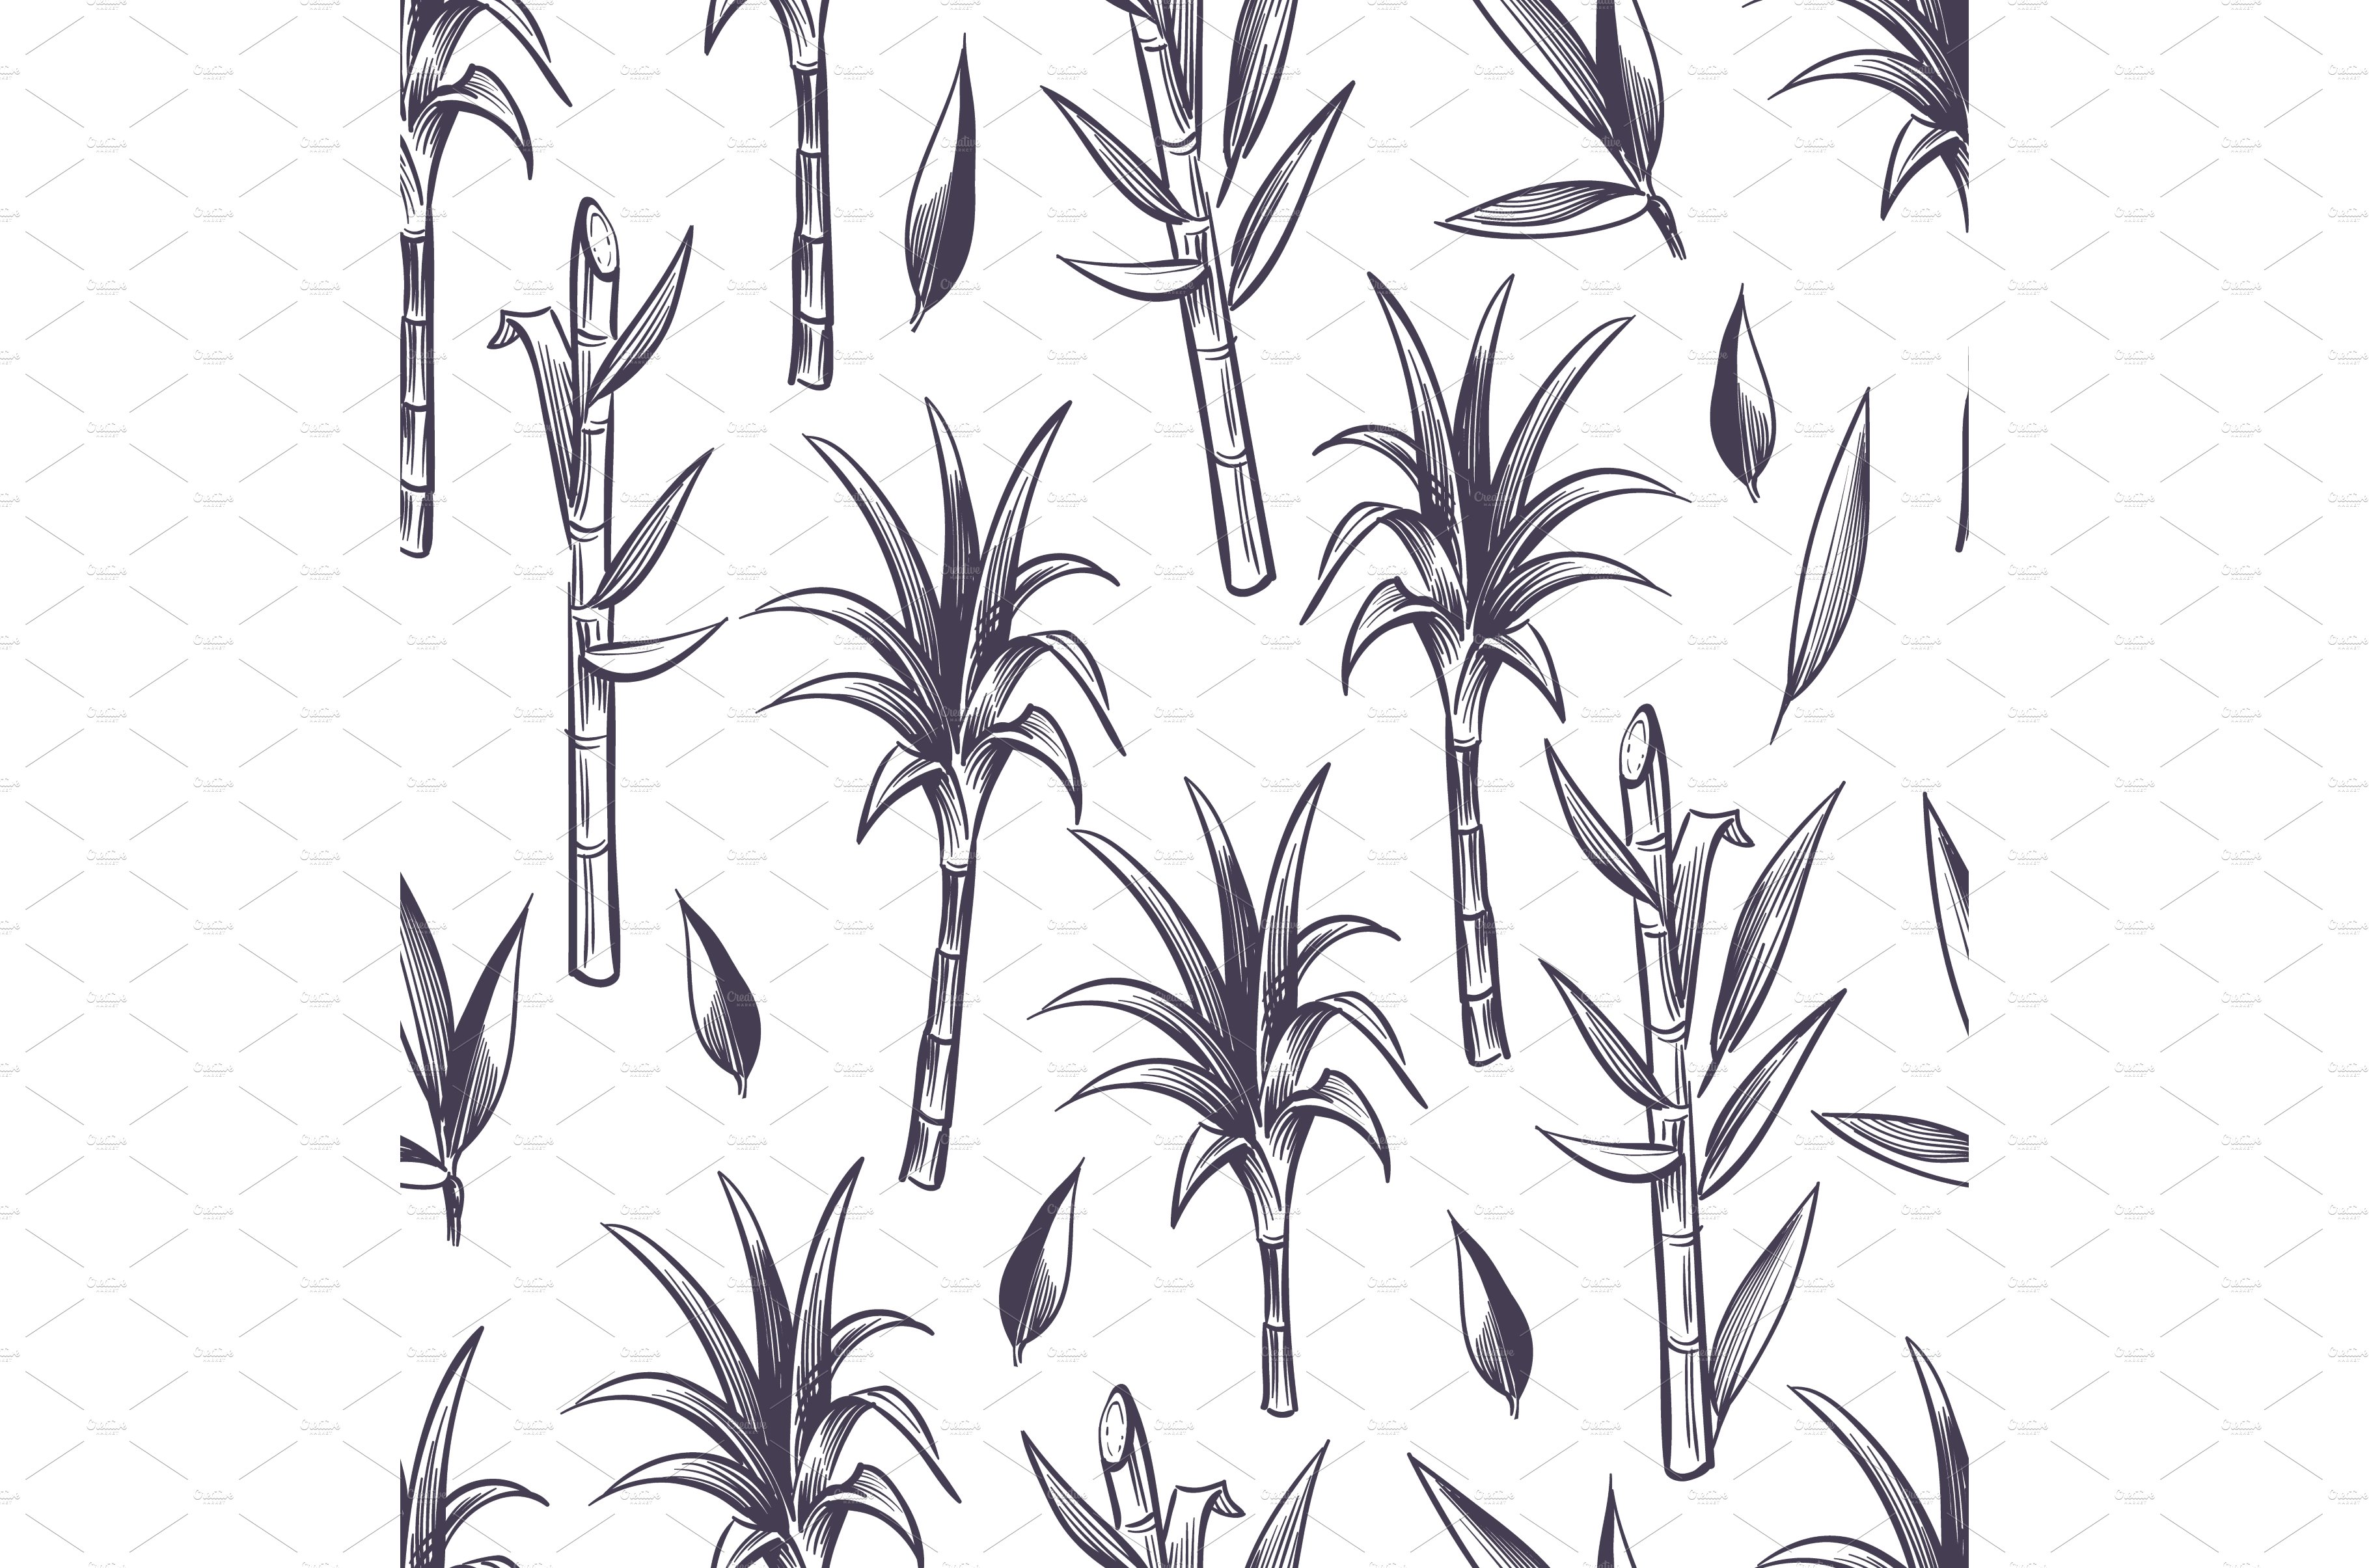 Black and white drawing of bamboo trees.